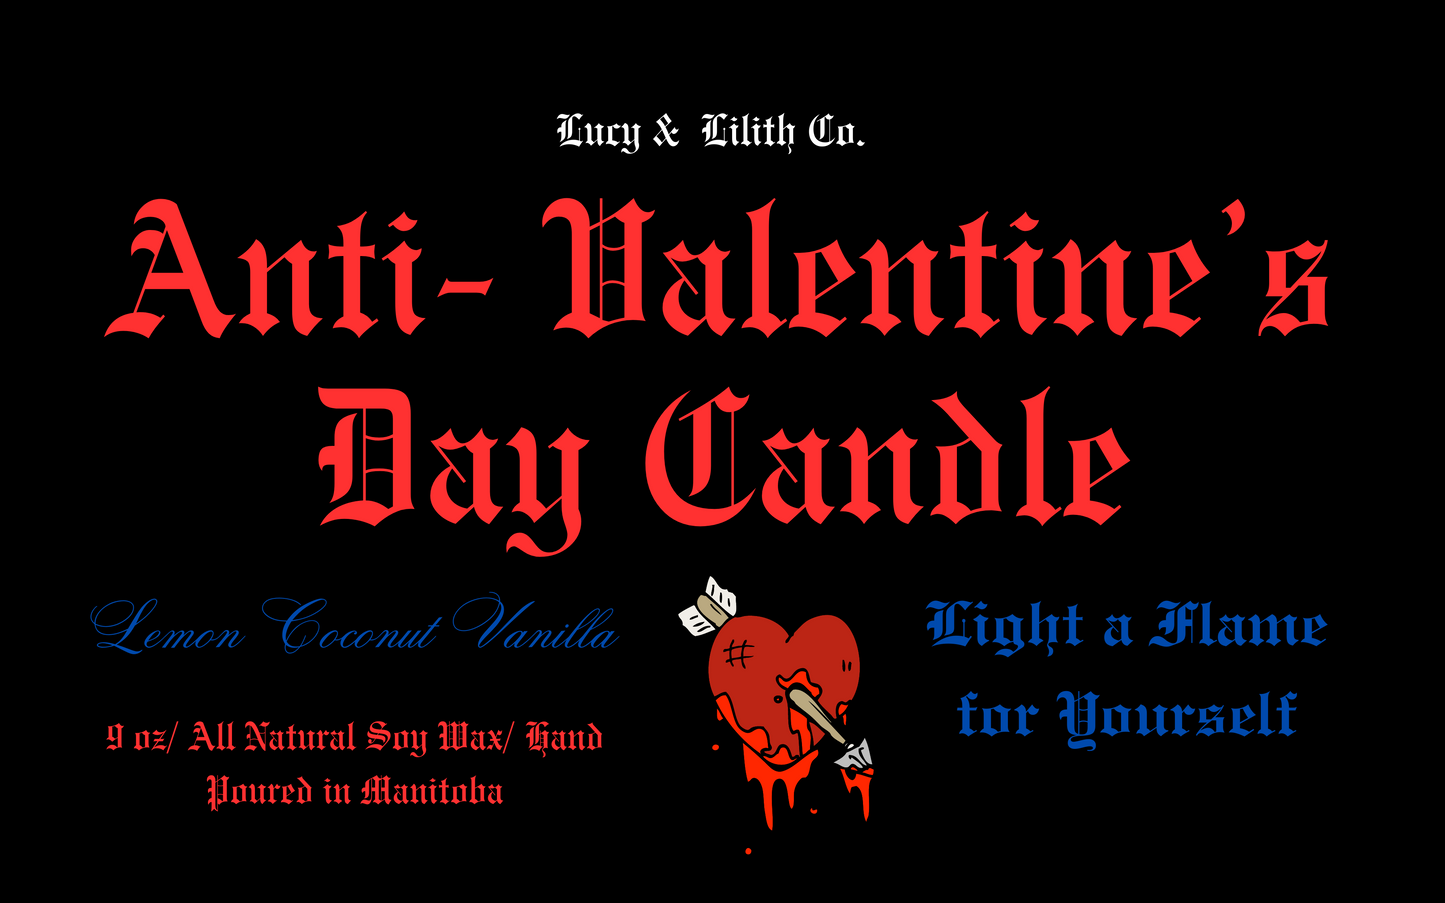 Anti-Valentine's Day Candle